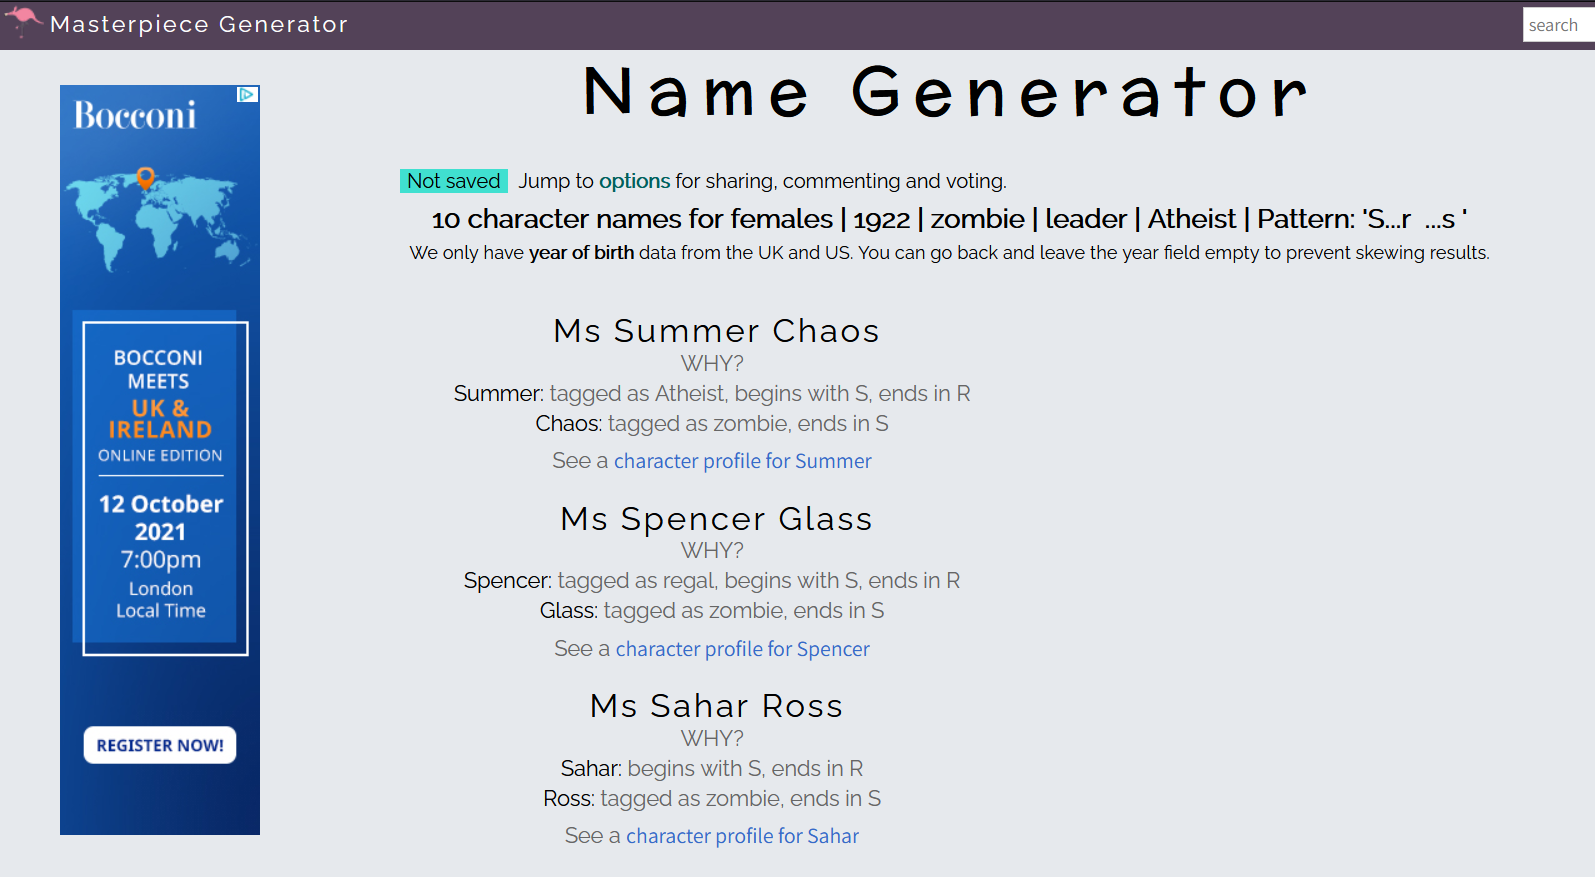 Name Generator Character Profile Results